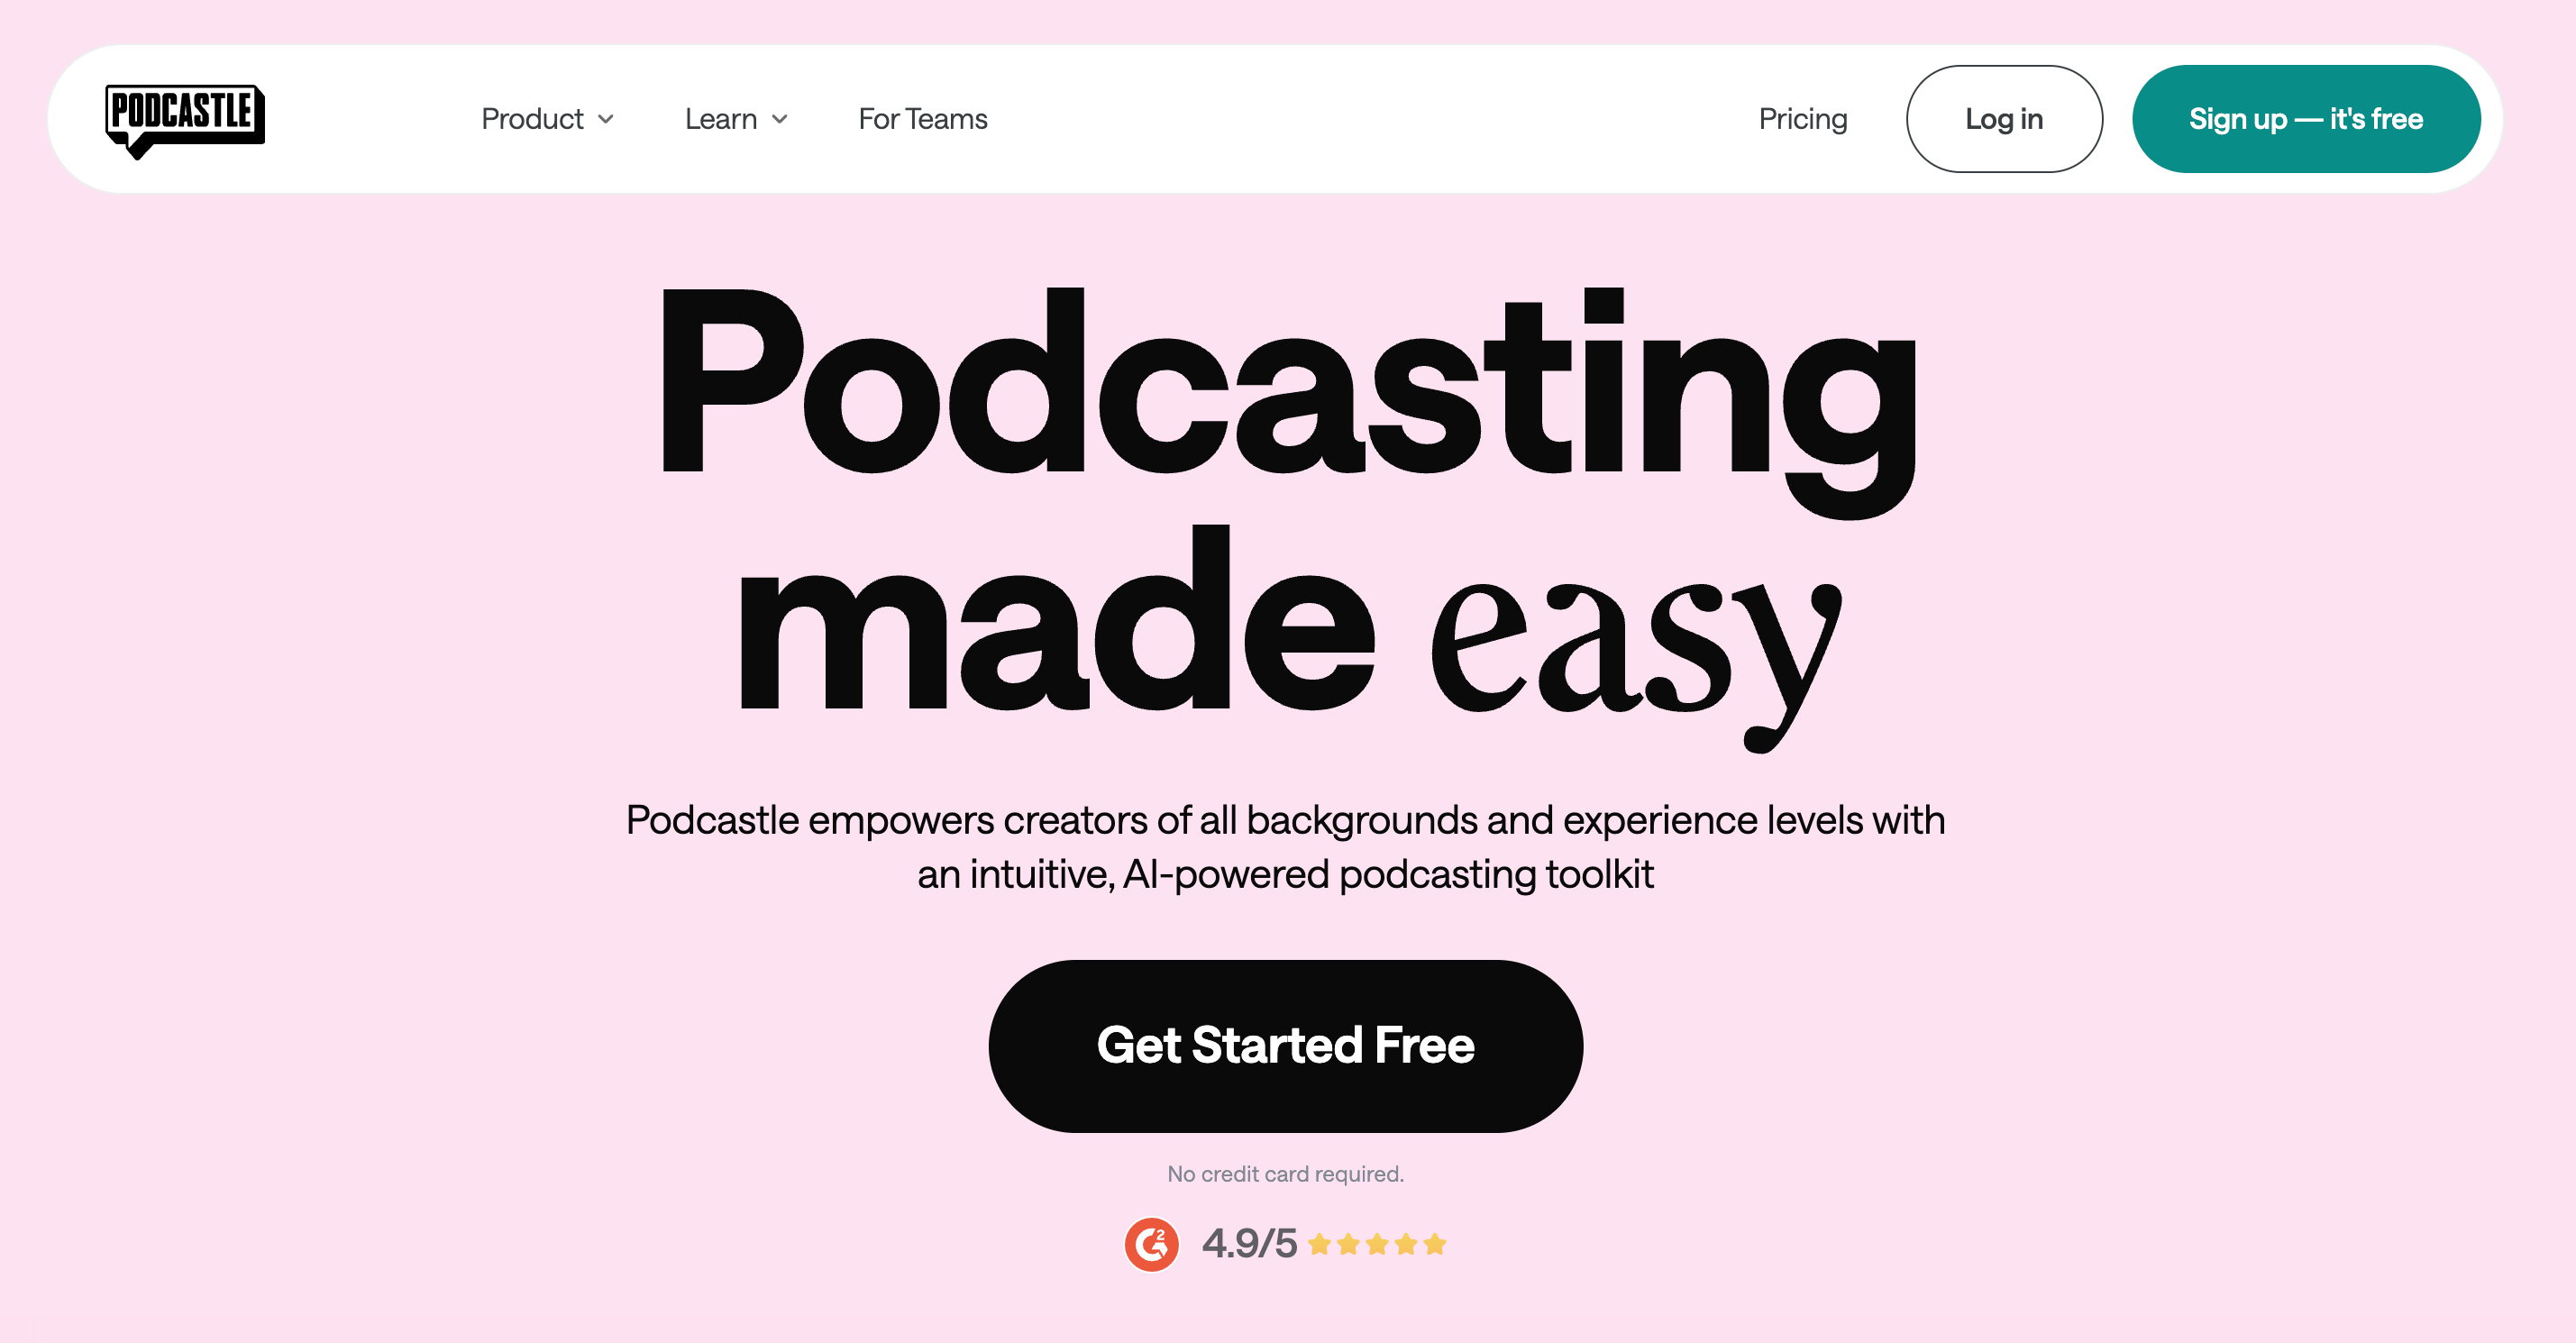 Podcastle homepage: Podcasting made easy